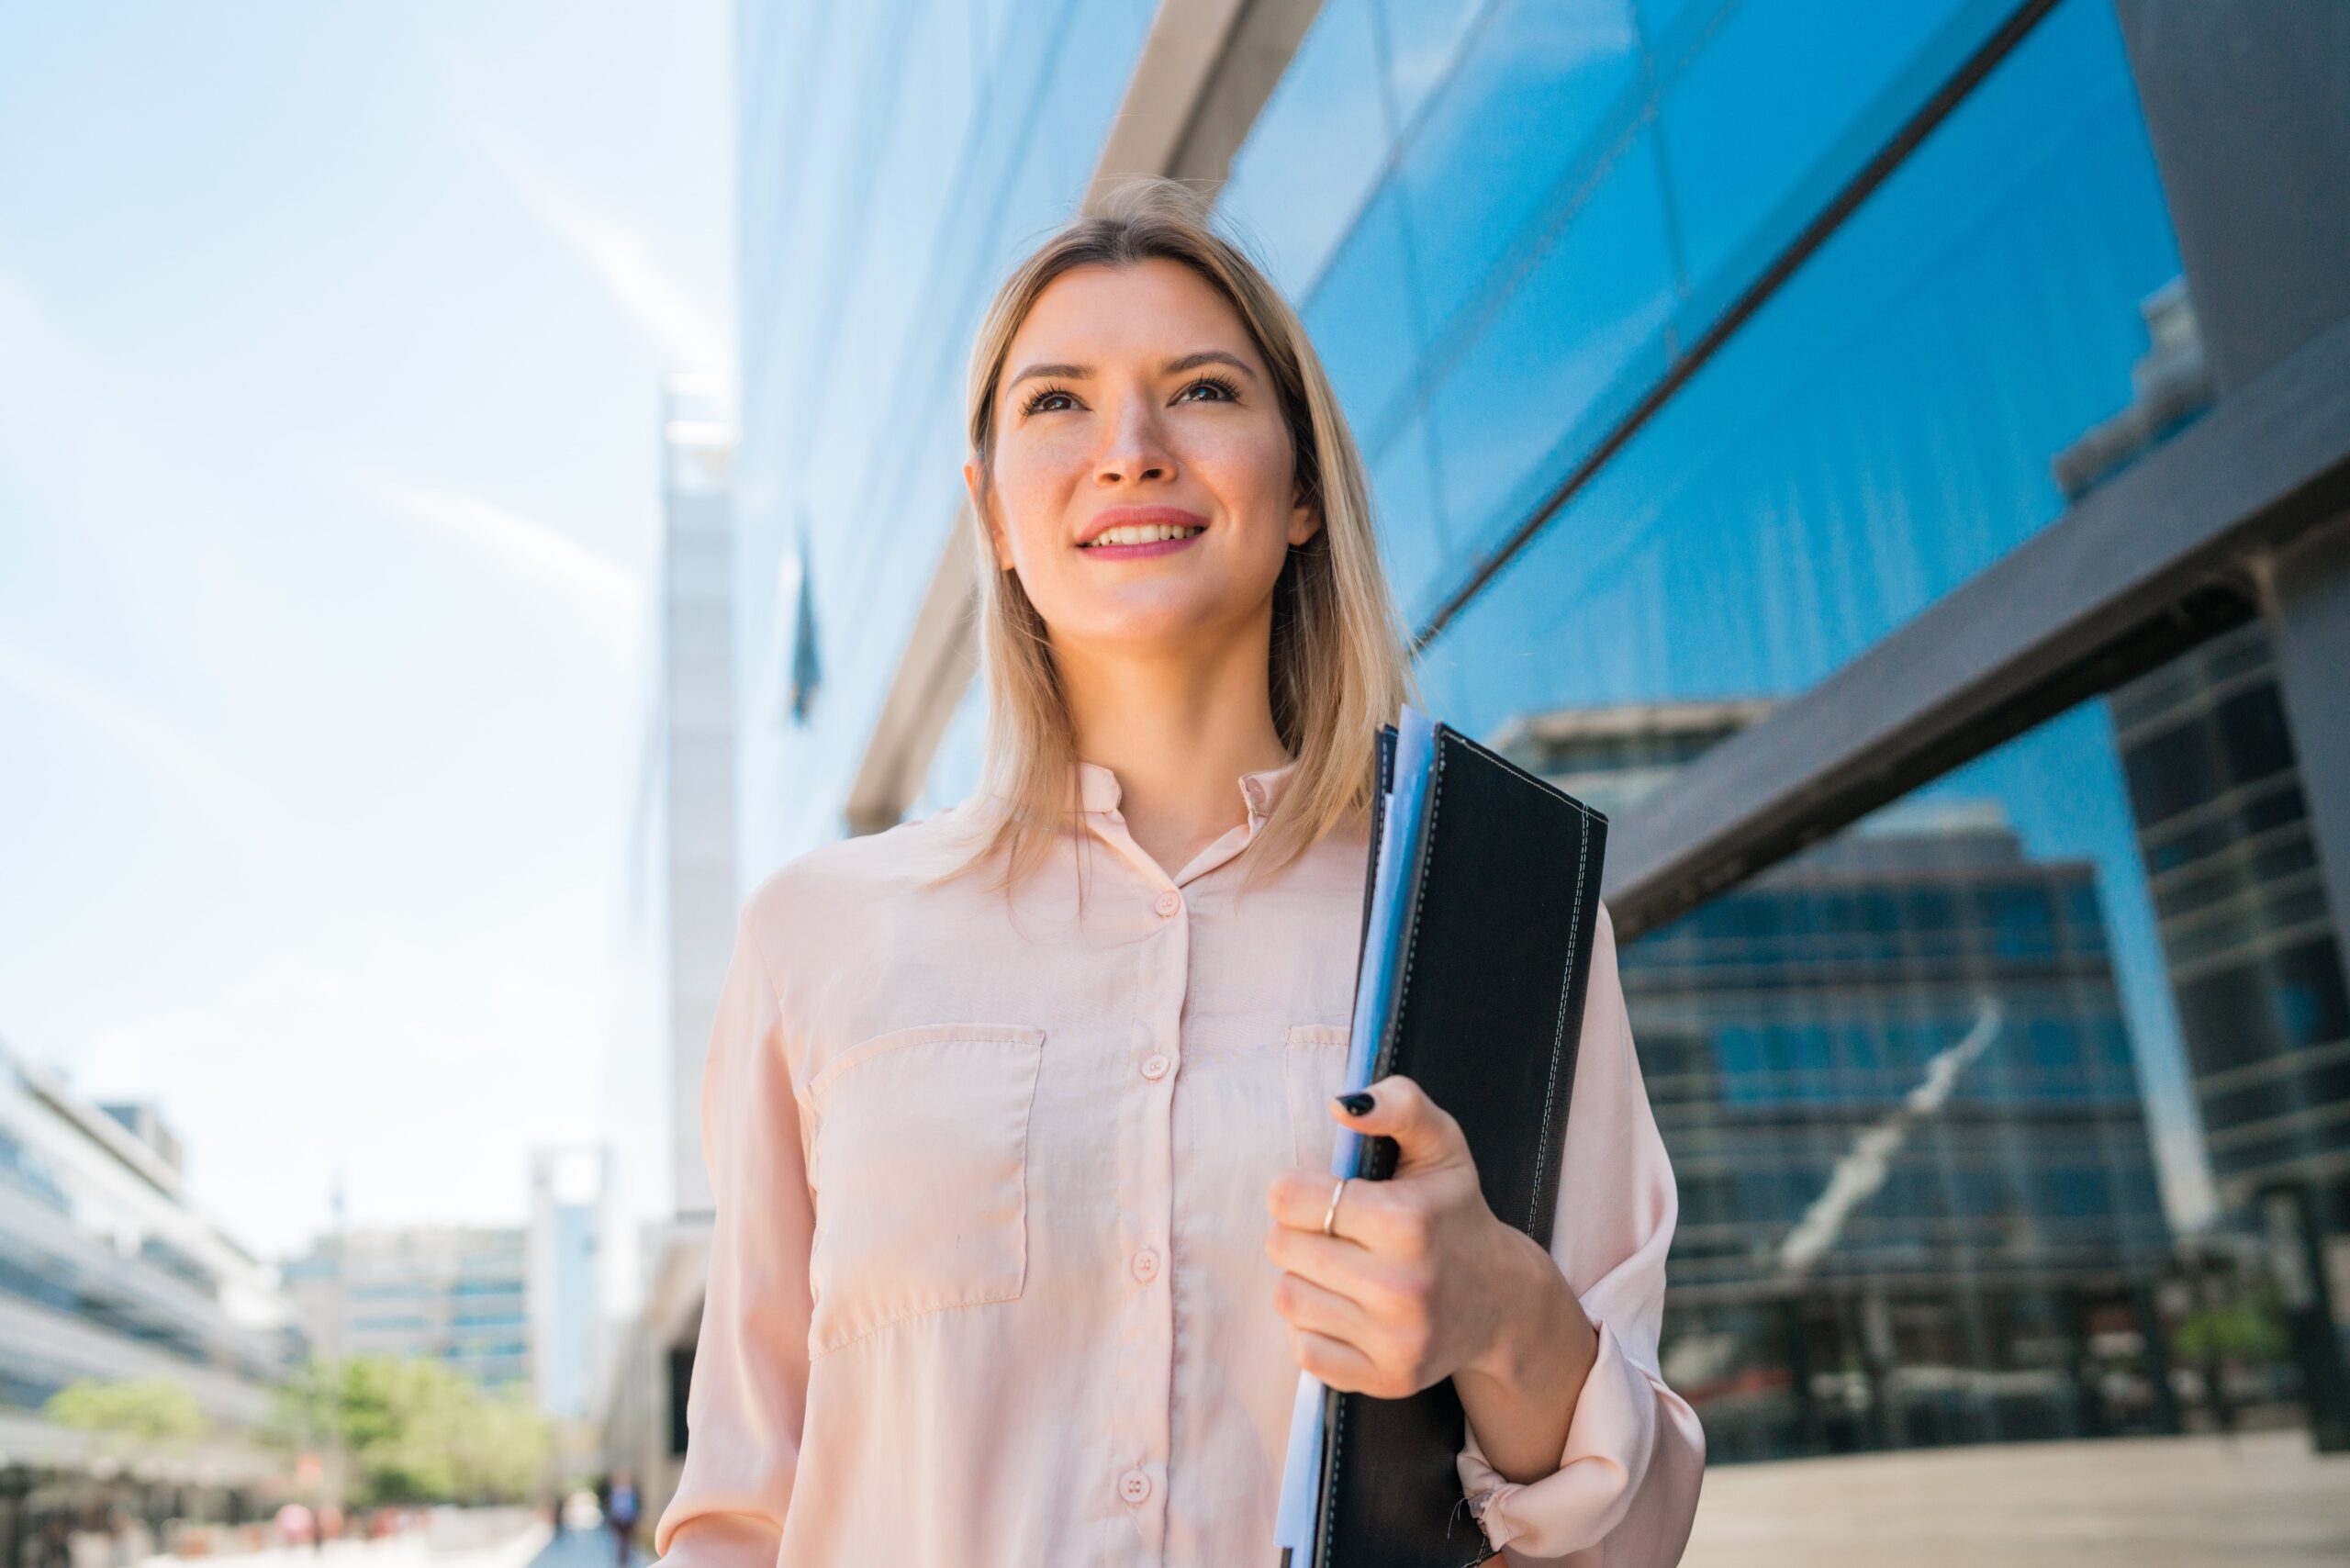 https://doradcy365.pl/wp-content/uploads/2021/10/portrait-young-business-woman-standing-outside-office-buildings-business-success-concept-min-scaled.jpg